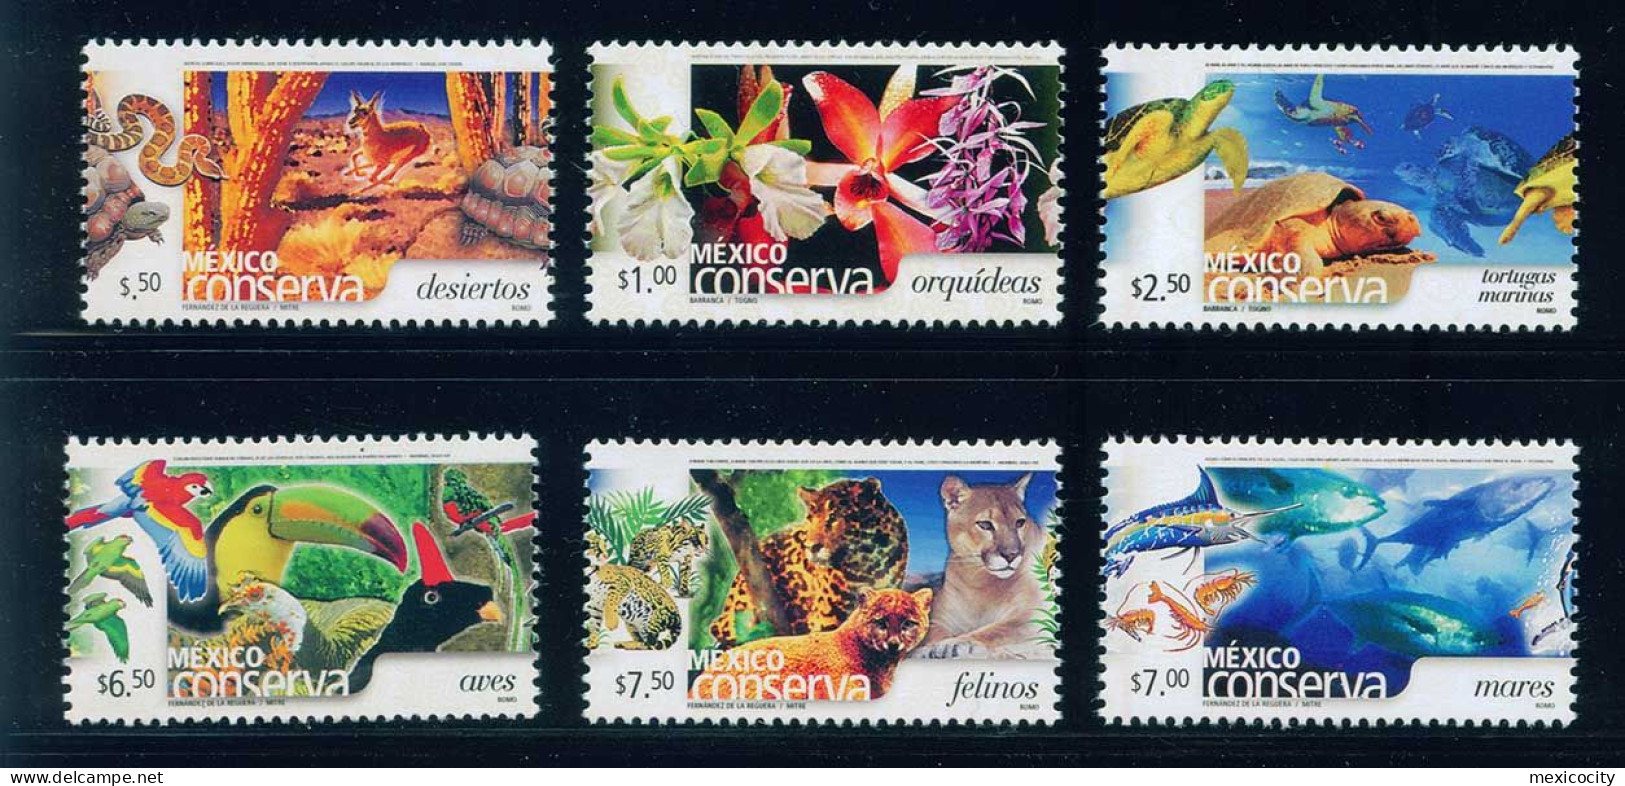 MEXICO 2005 Definitives Romo Printings 6 Diff. Stamp Collection, Mint NH Unmounted, Scarce Set Thus - Mexique